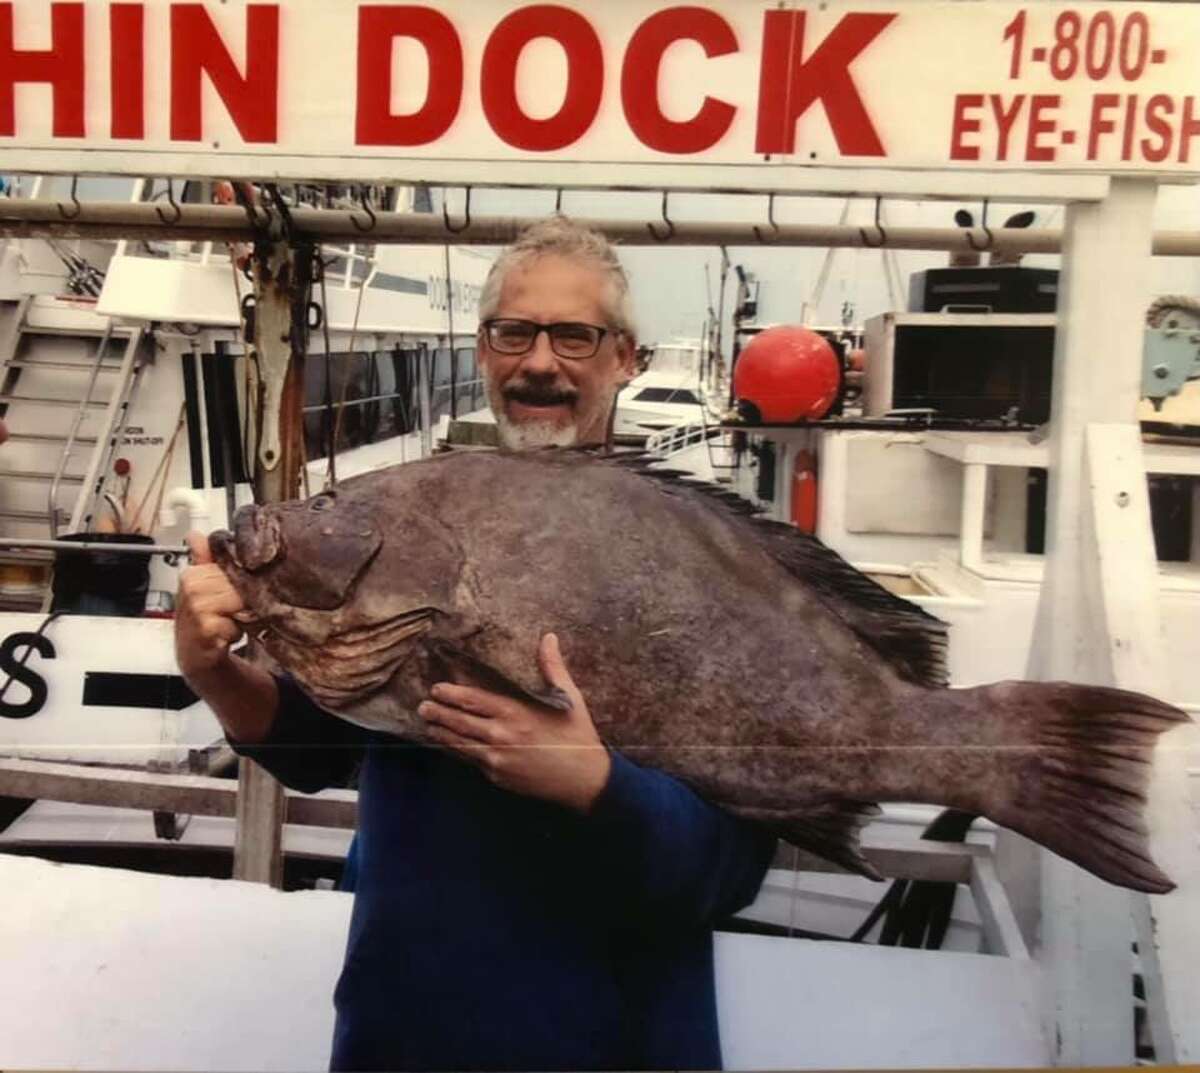 A Texas angler reeled in a possible world and state-record marbled grouper during an offshore fishing trip in Port Aransas.